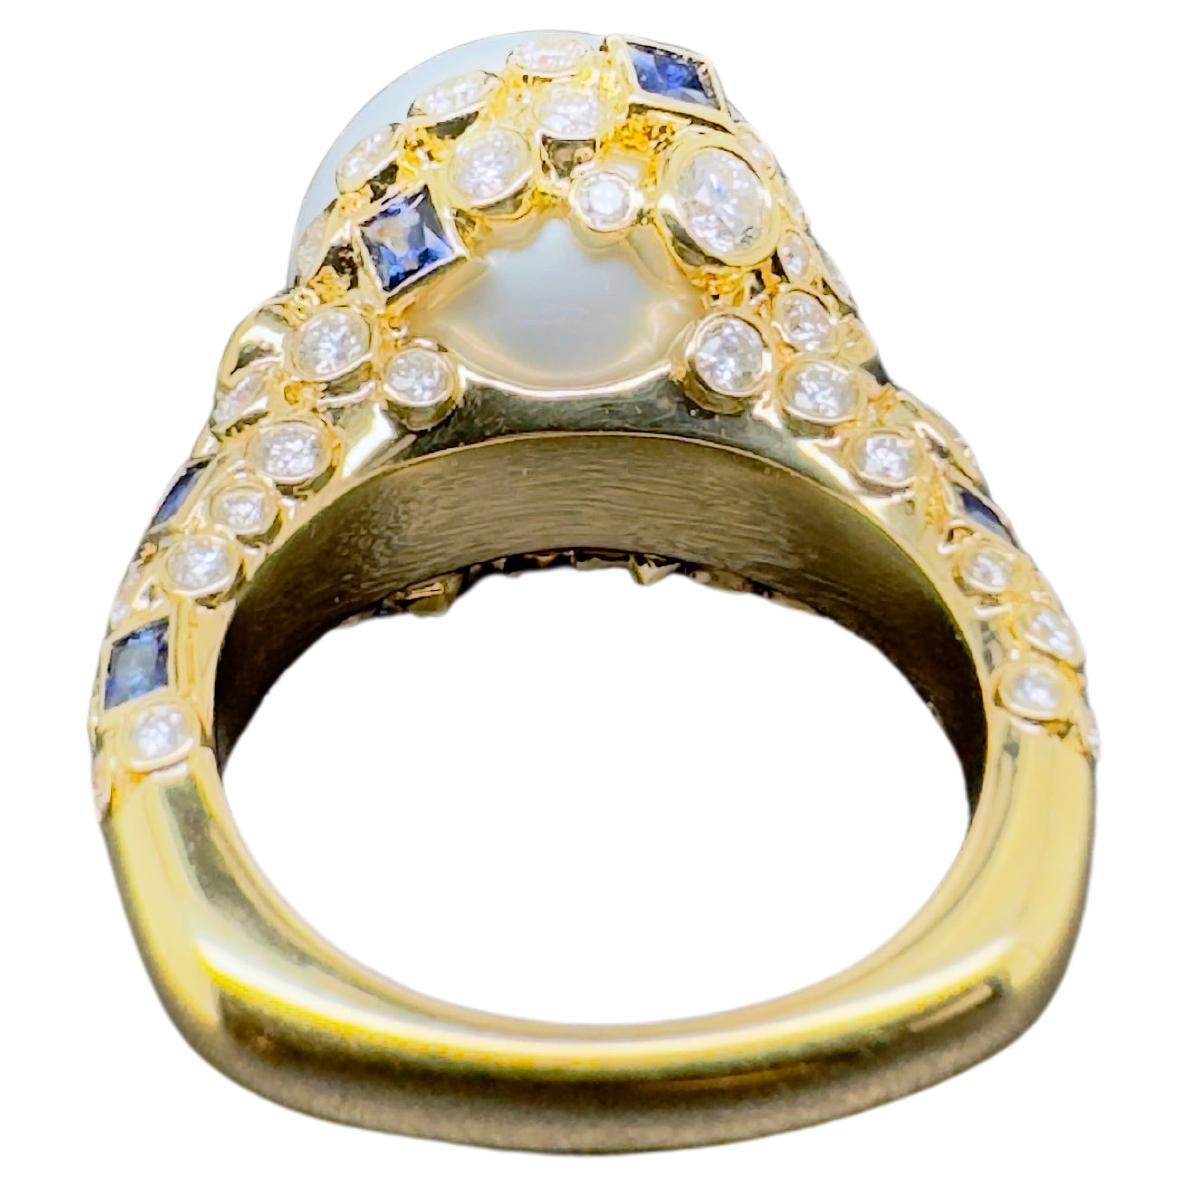 This pearl ring is an absolute masterpiece.  The 14.5 mm White South Sea Pearl is set in a custom design setting that is artistically mesmerizing.  The square blue sapphires are bezel set that scattered amongst the round brilliant diamonds bezel set